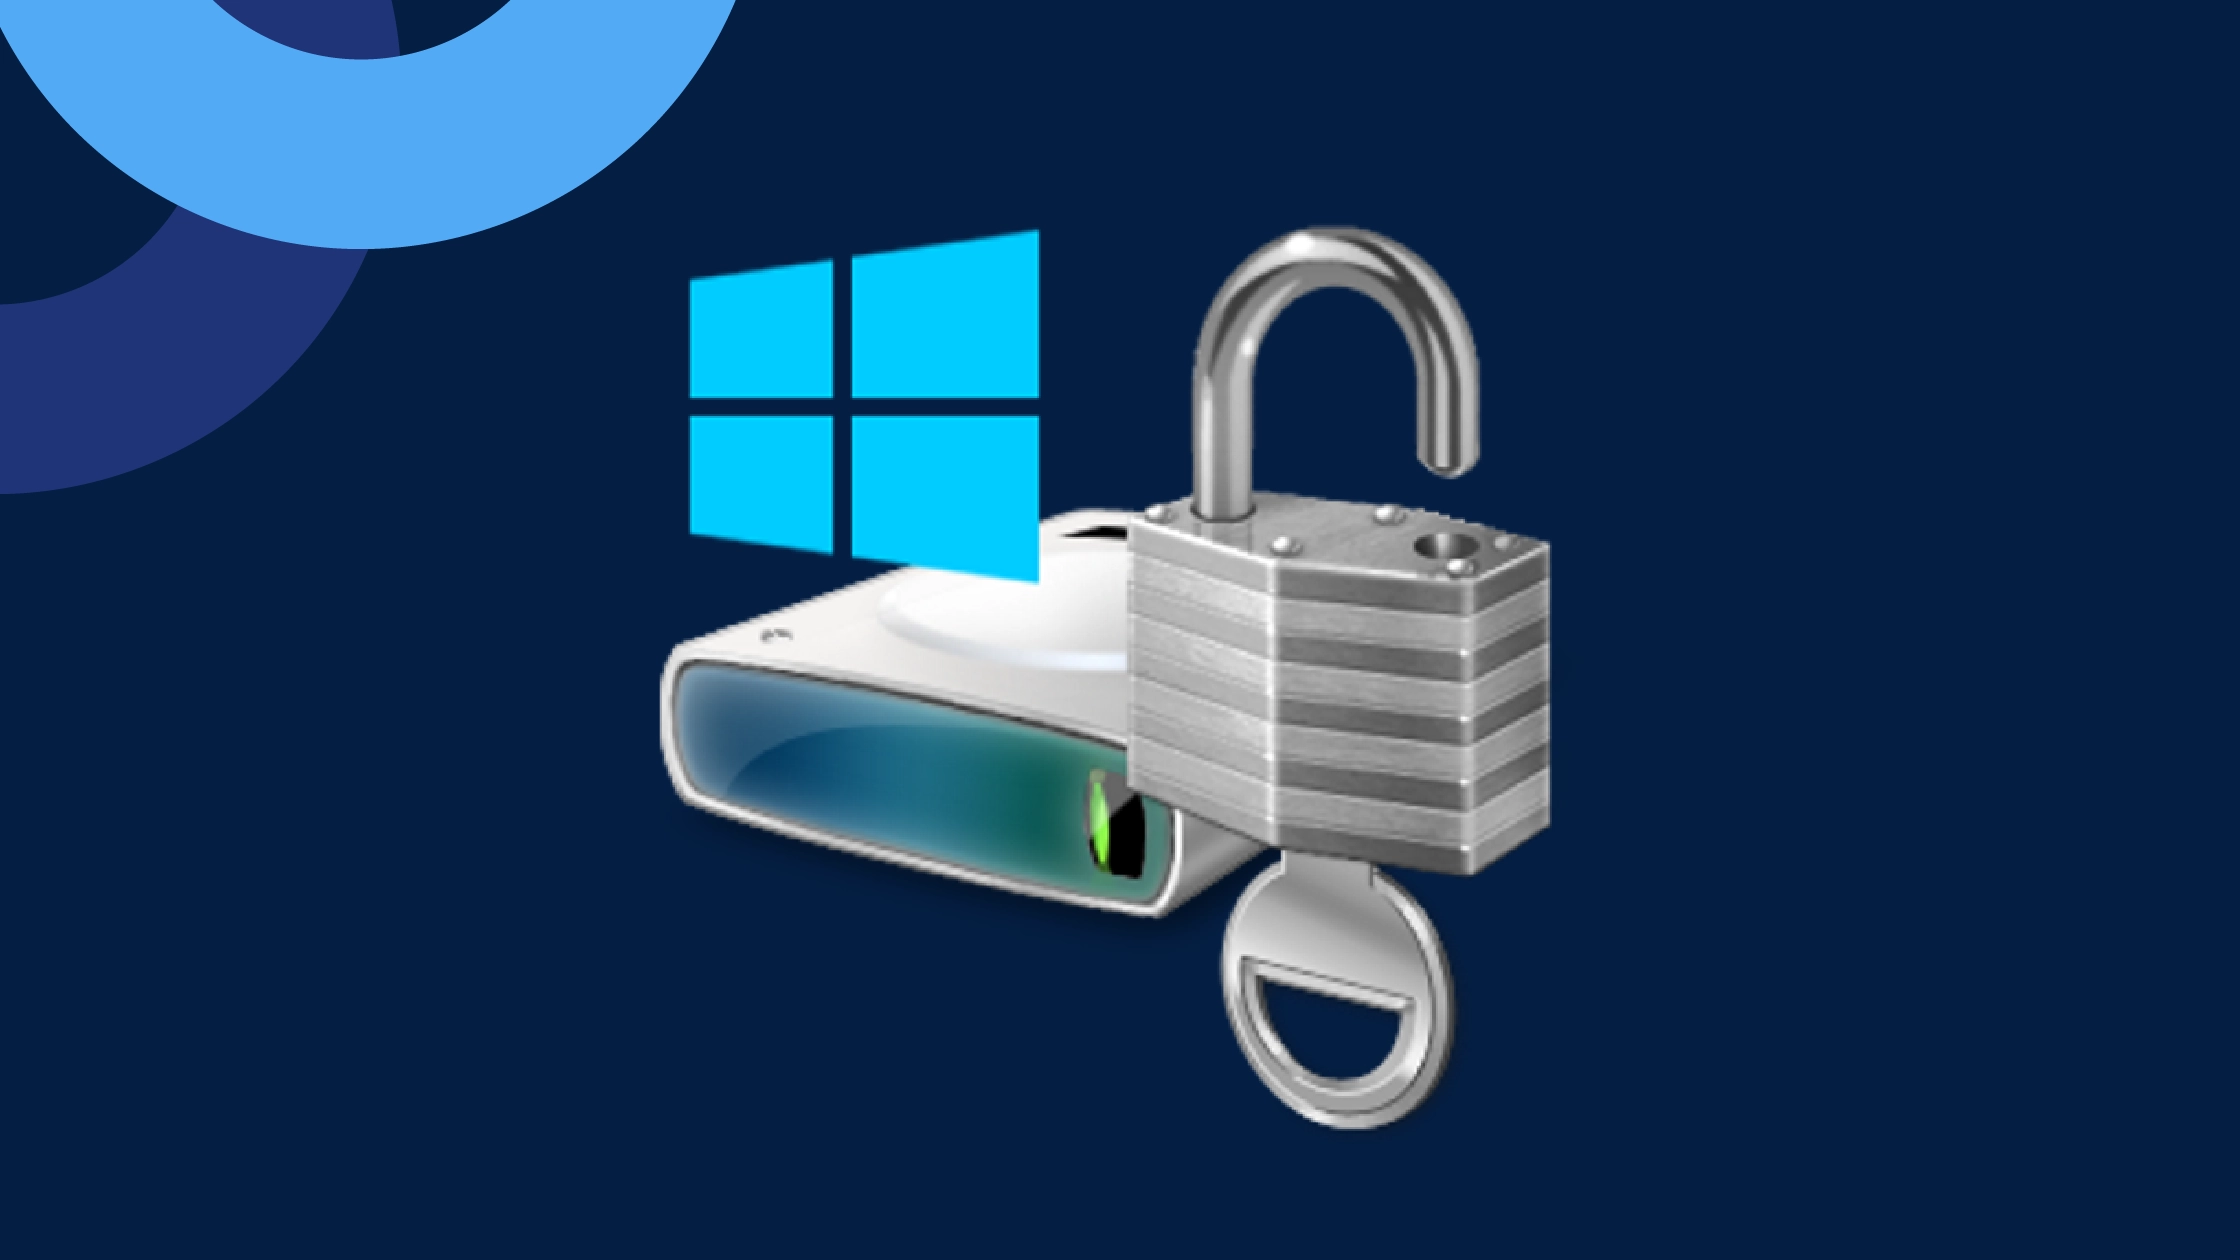 navy blue background with images that represent extration of protected images from bitlocker on a windows computer